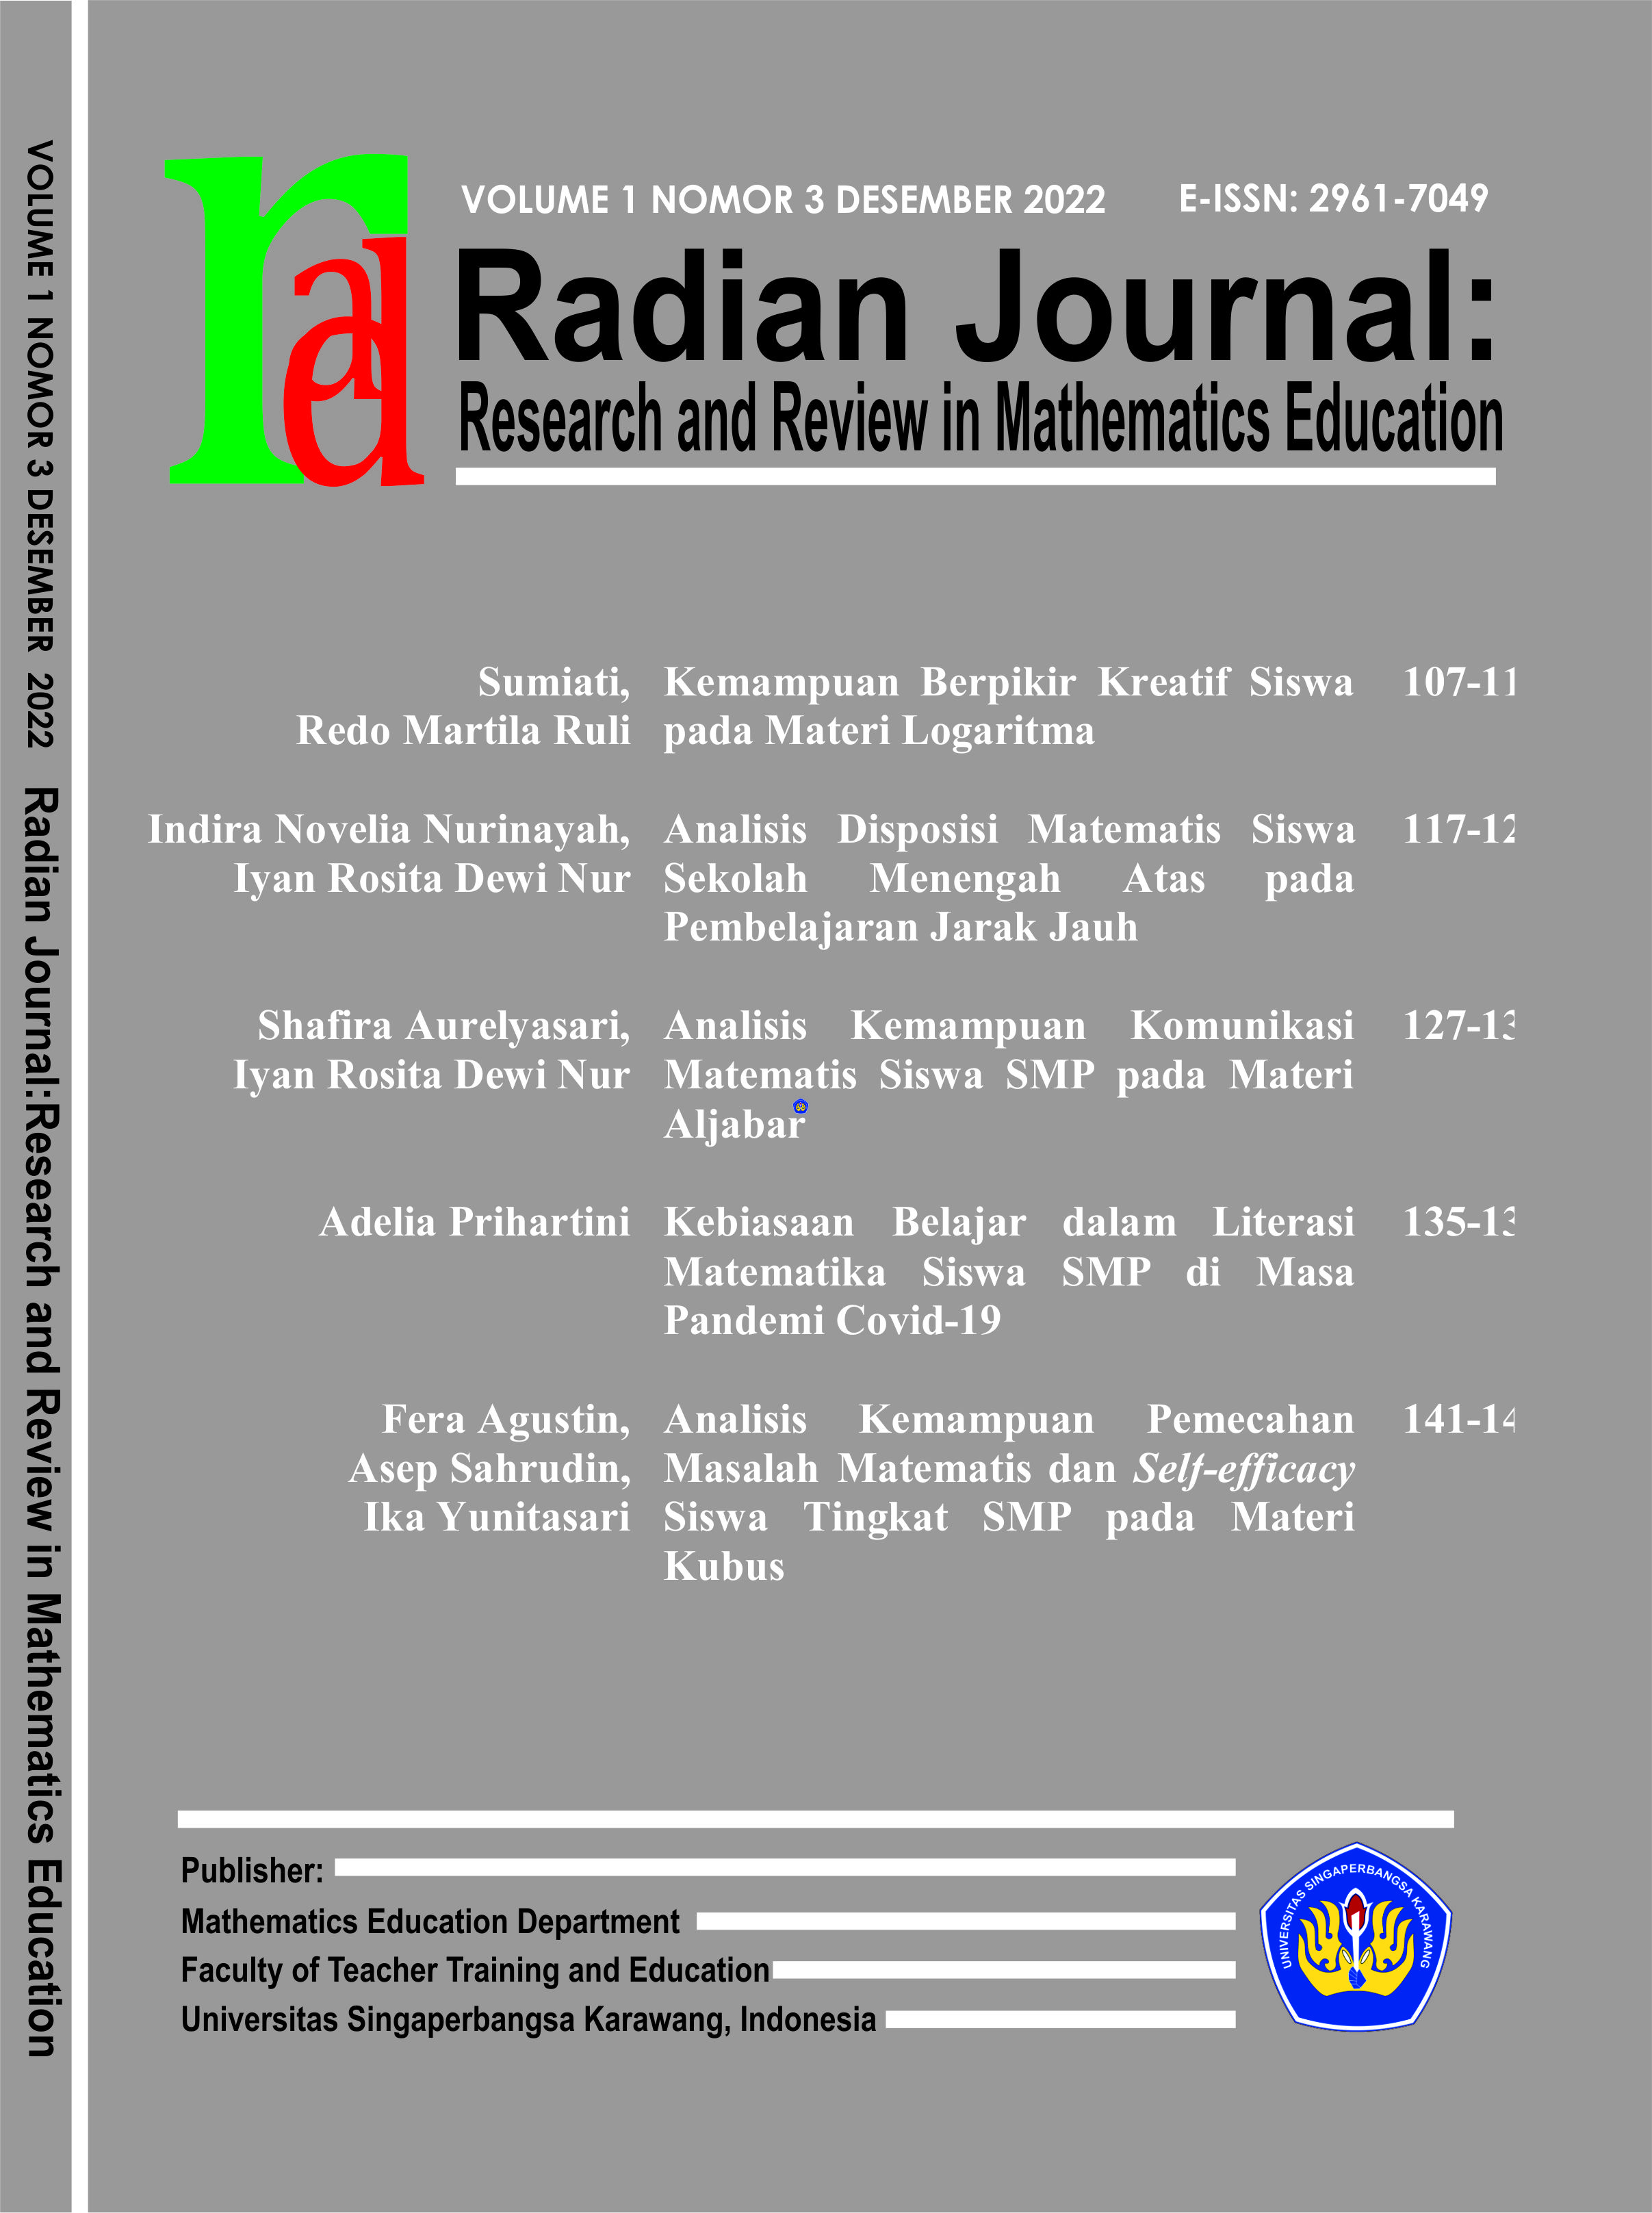 					Lihat Vol 1 No 3 (2022): Radian Journal: Research and Review in Mathematics Education 
				